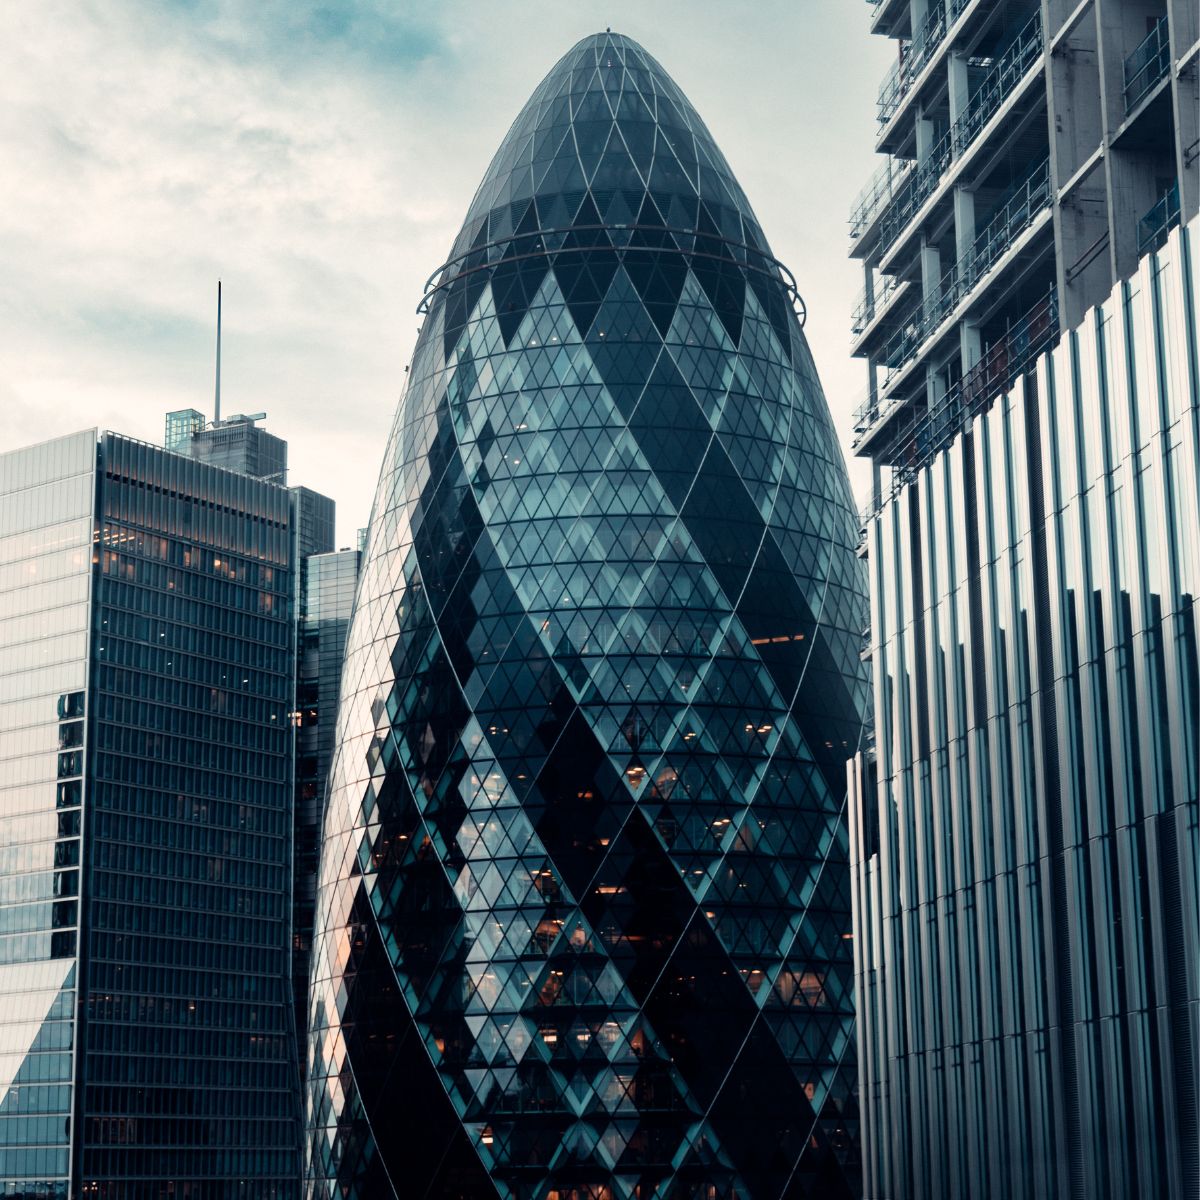 Reception Services Contract at The Gherkin Won by Bennett Hay